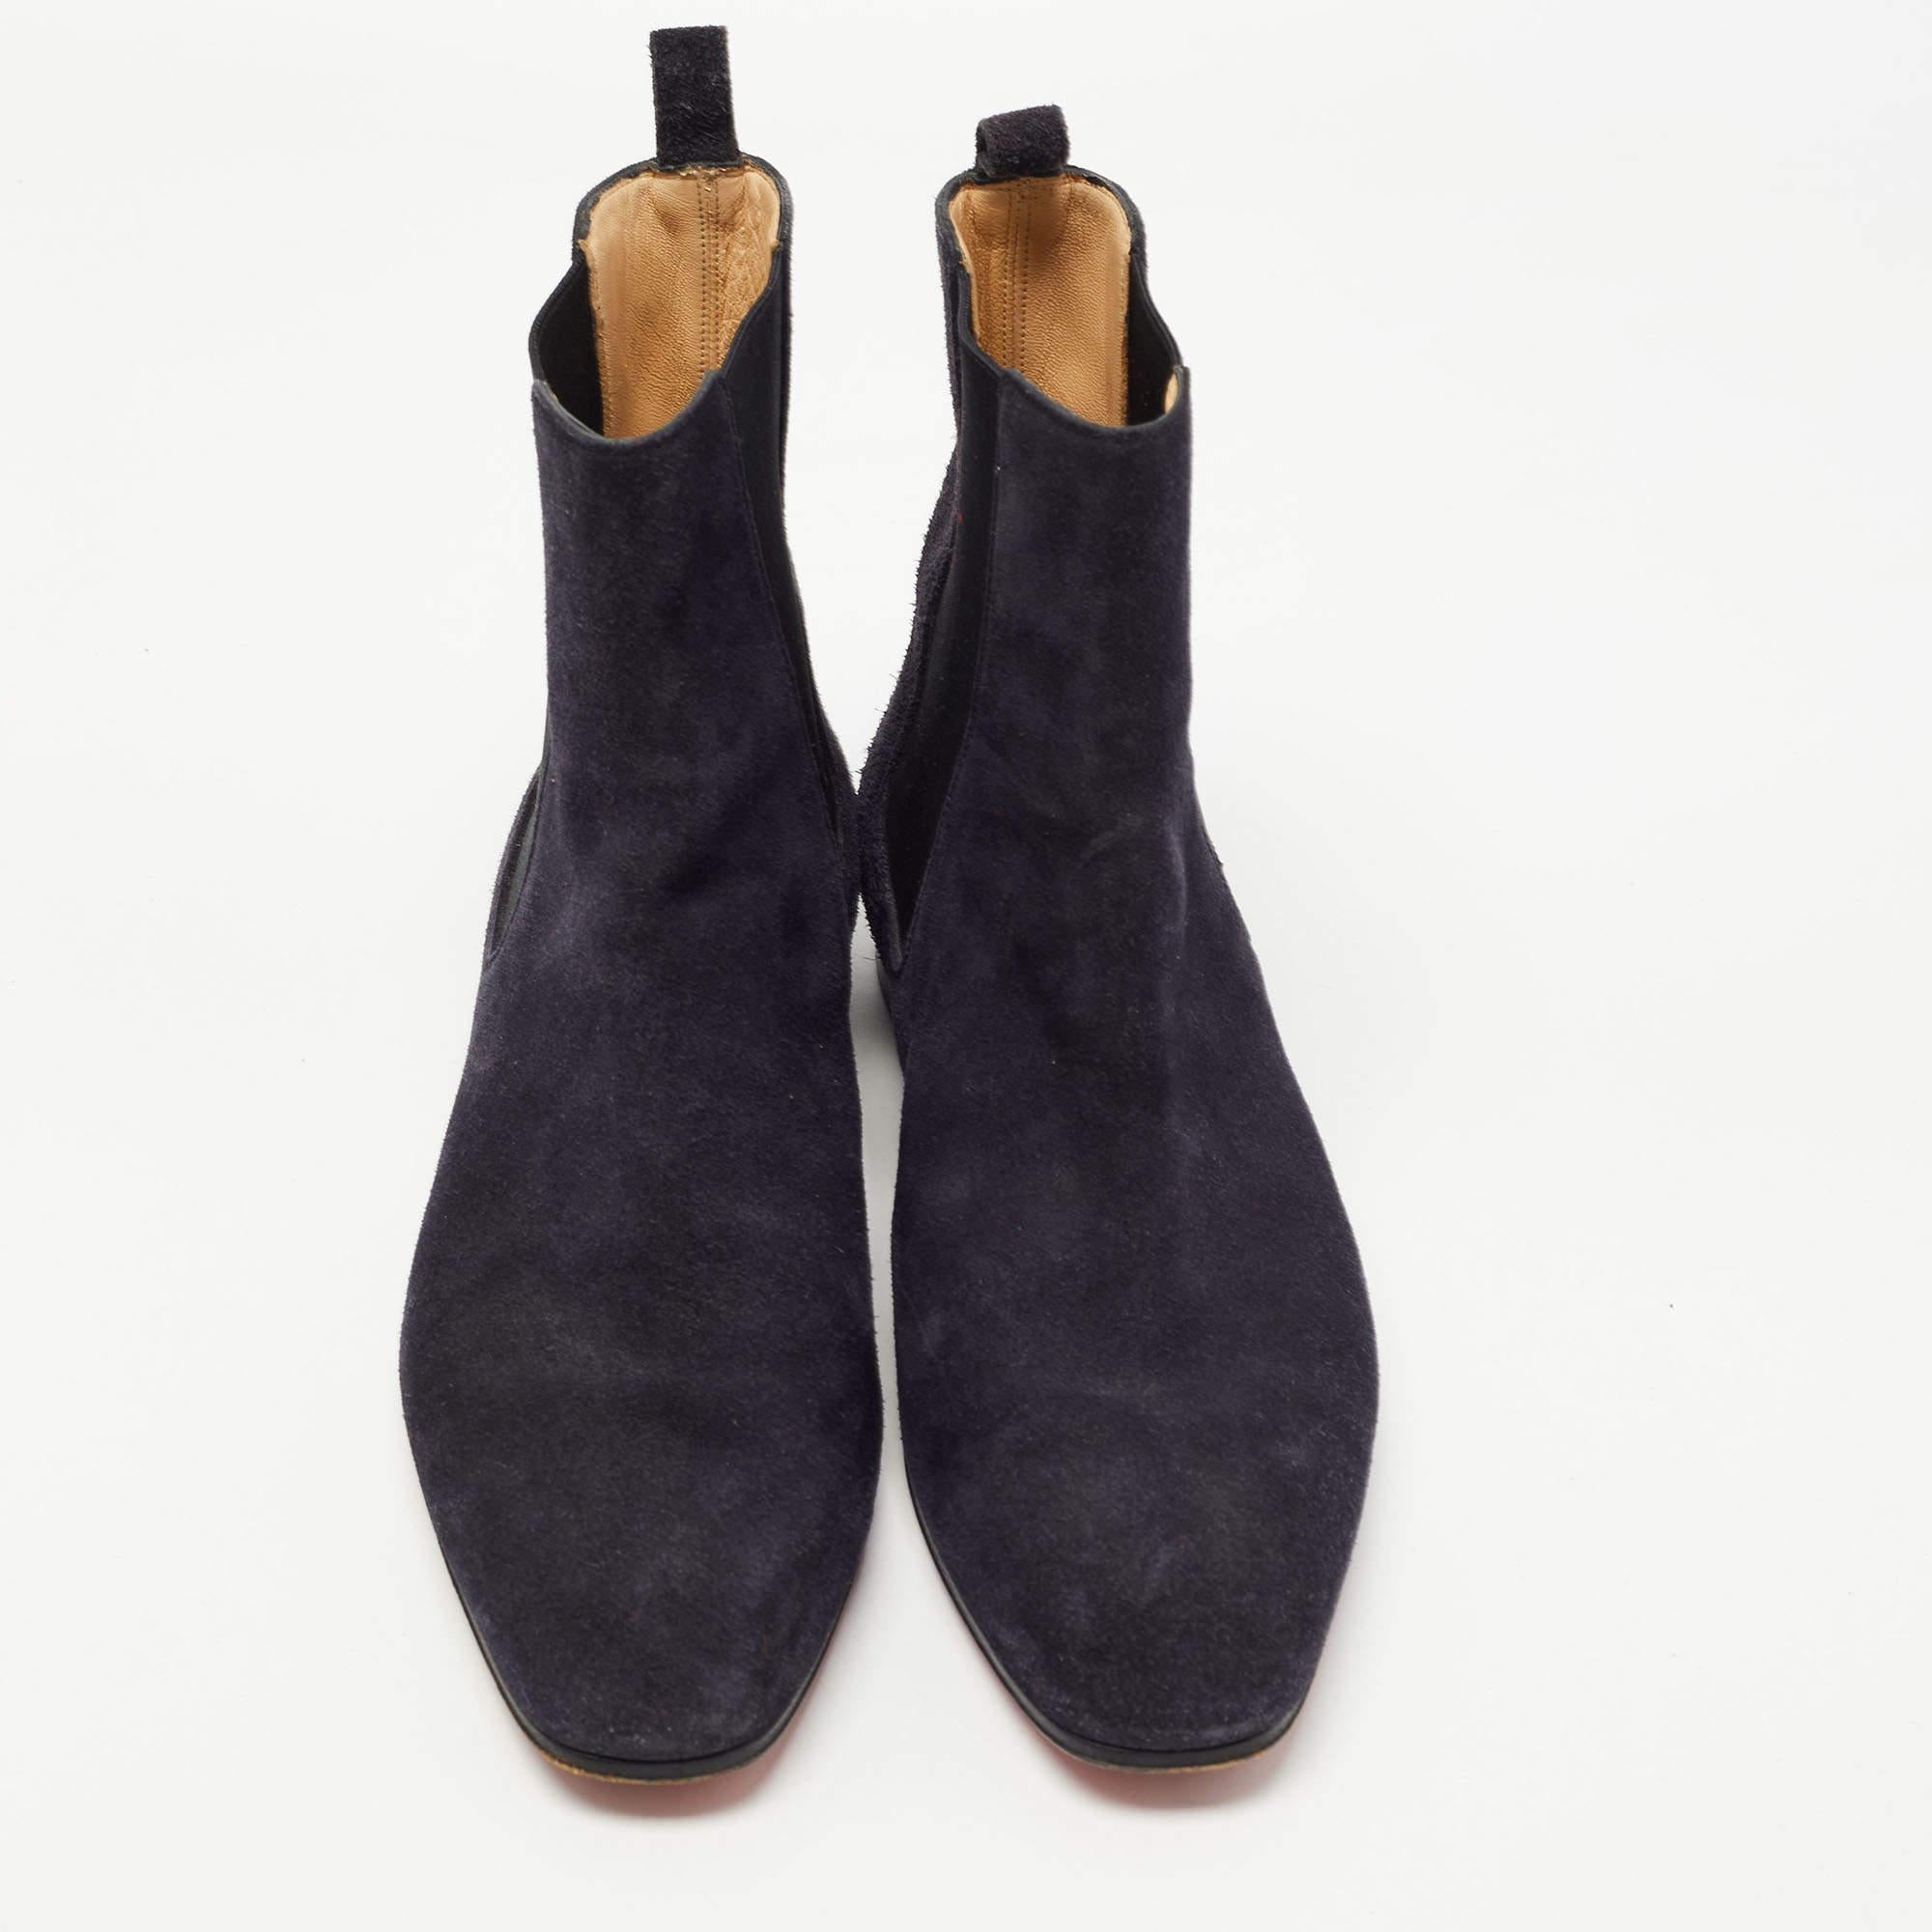 Celebrating the fusion of fine craftsmanship and luxury fashion, these Christian Louboutin Chelsea boots are absolutely worth the splurge. The navy blue boots are detailed with stretchable panels and equipped with comfortable insoles to assist you